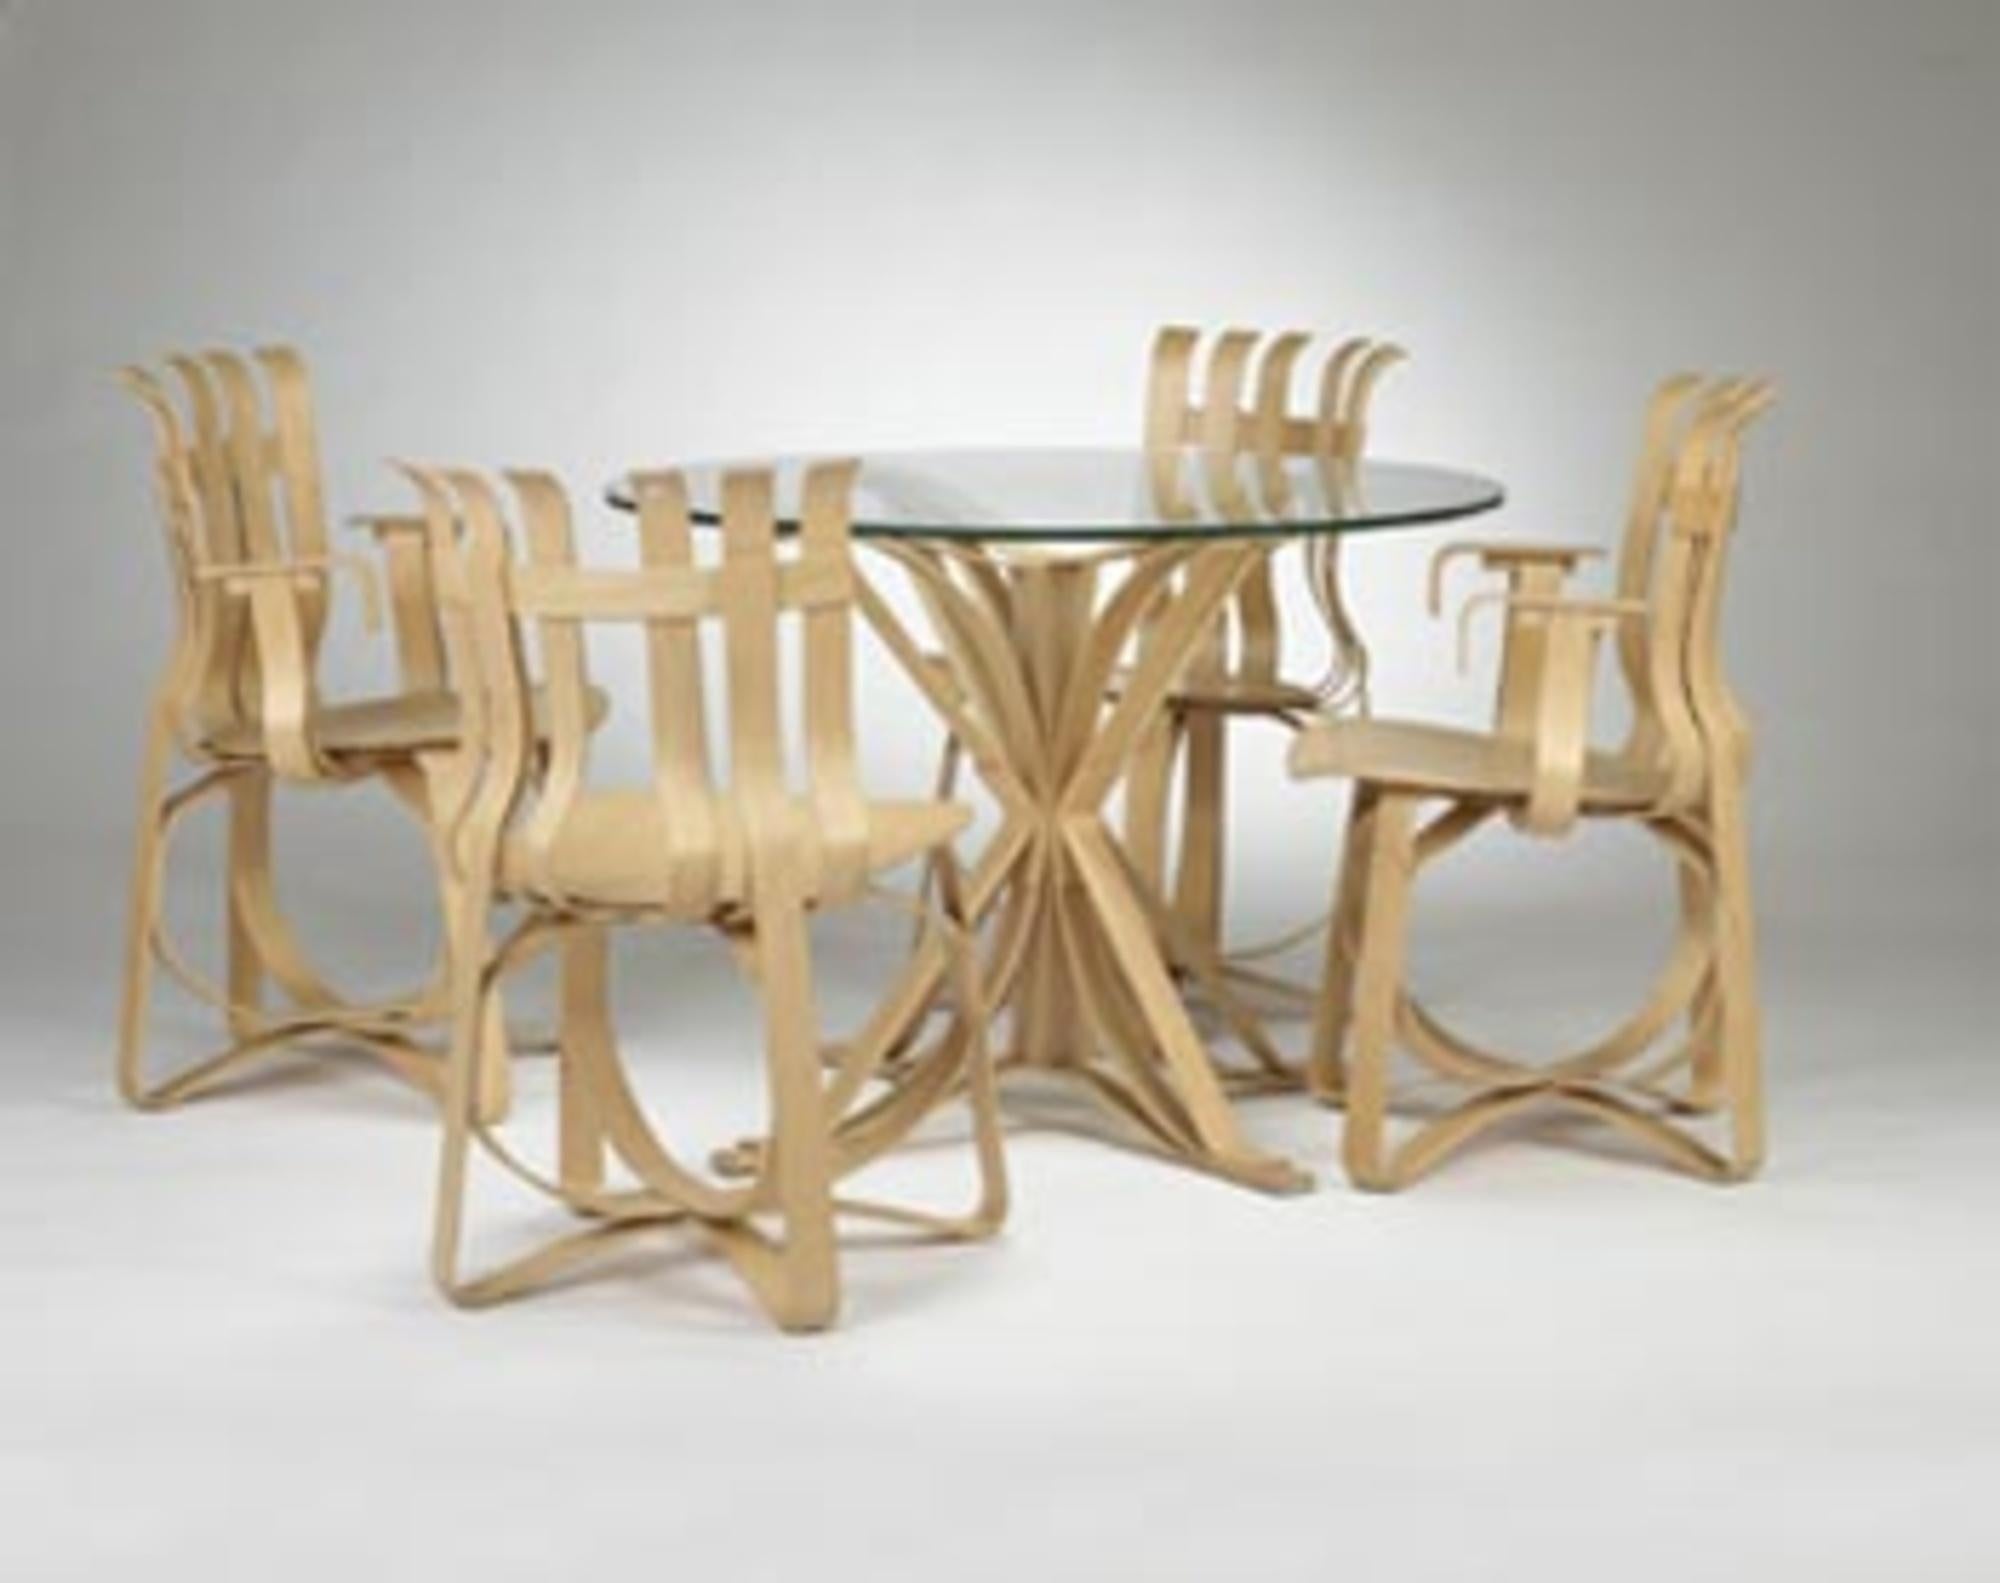 20th Century Frank Gehry for Knoll Hat Trick Chair, Set of 4, Bentwood Dining Chairs, 1990